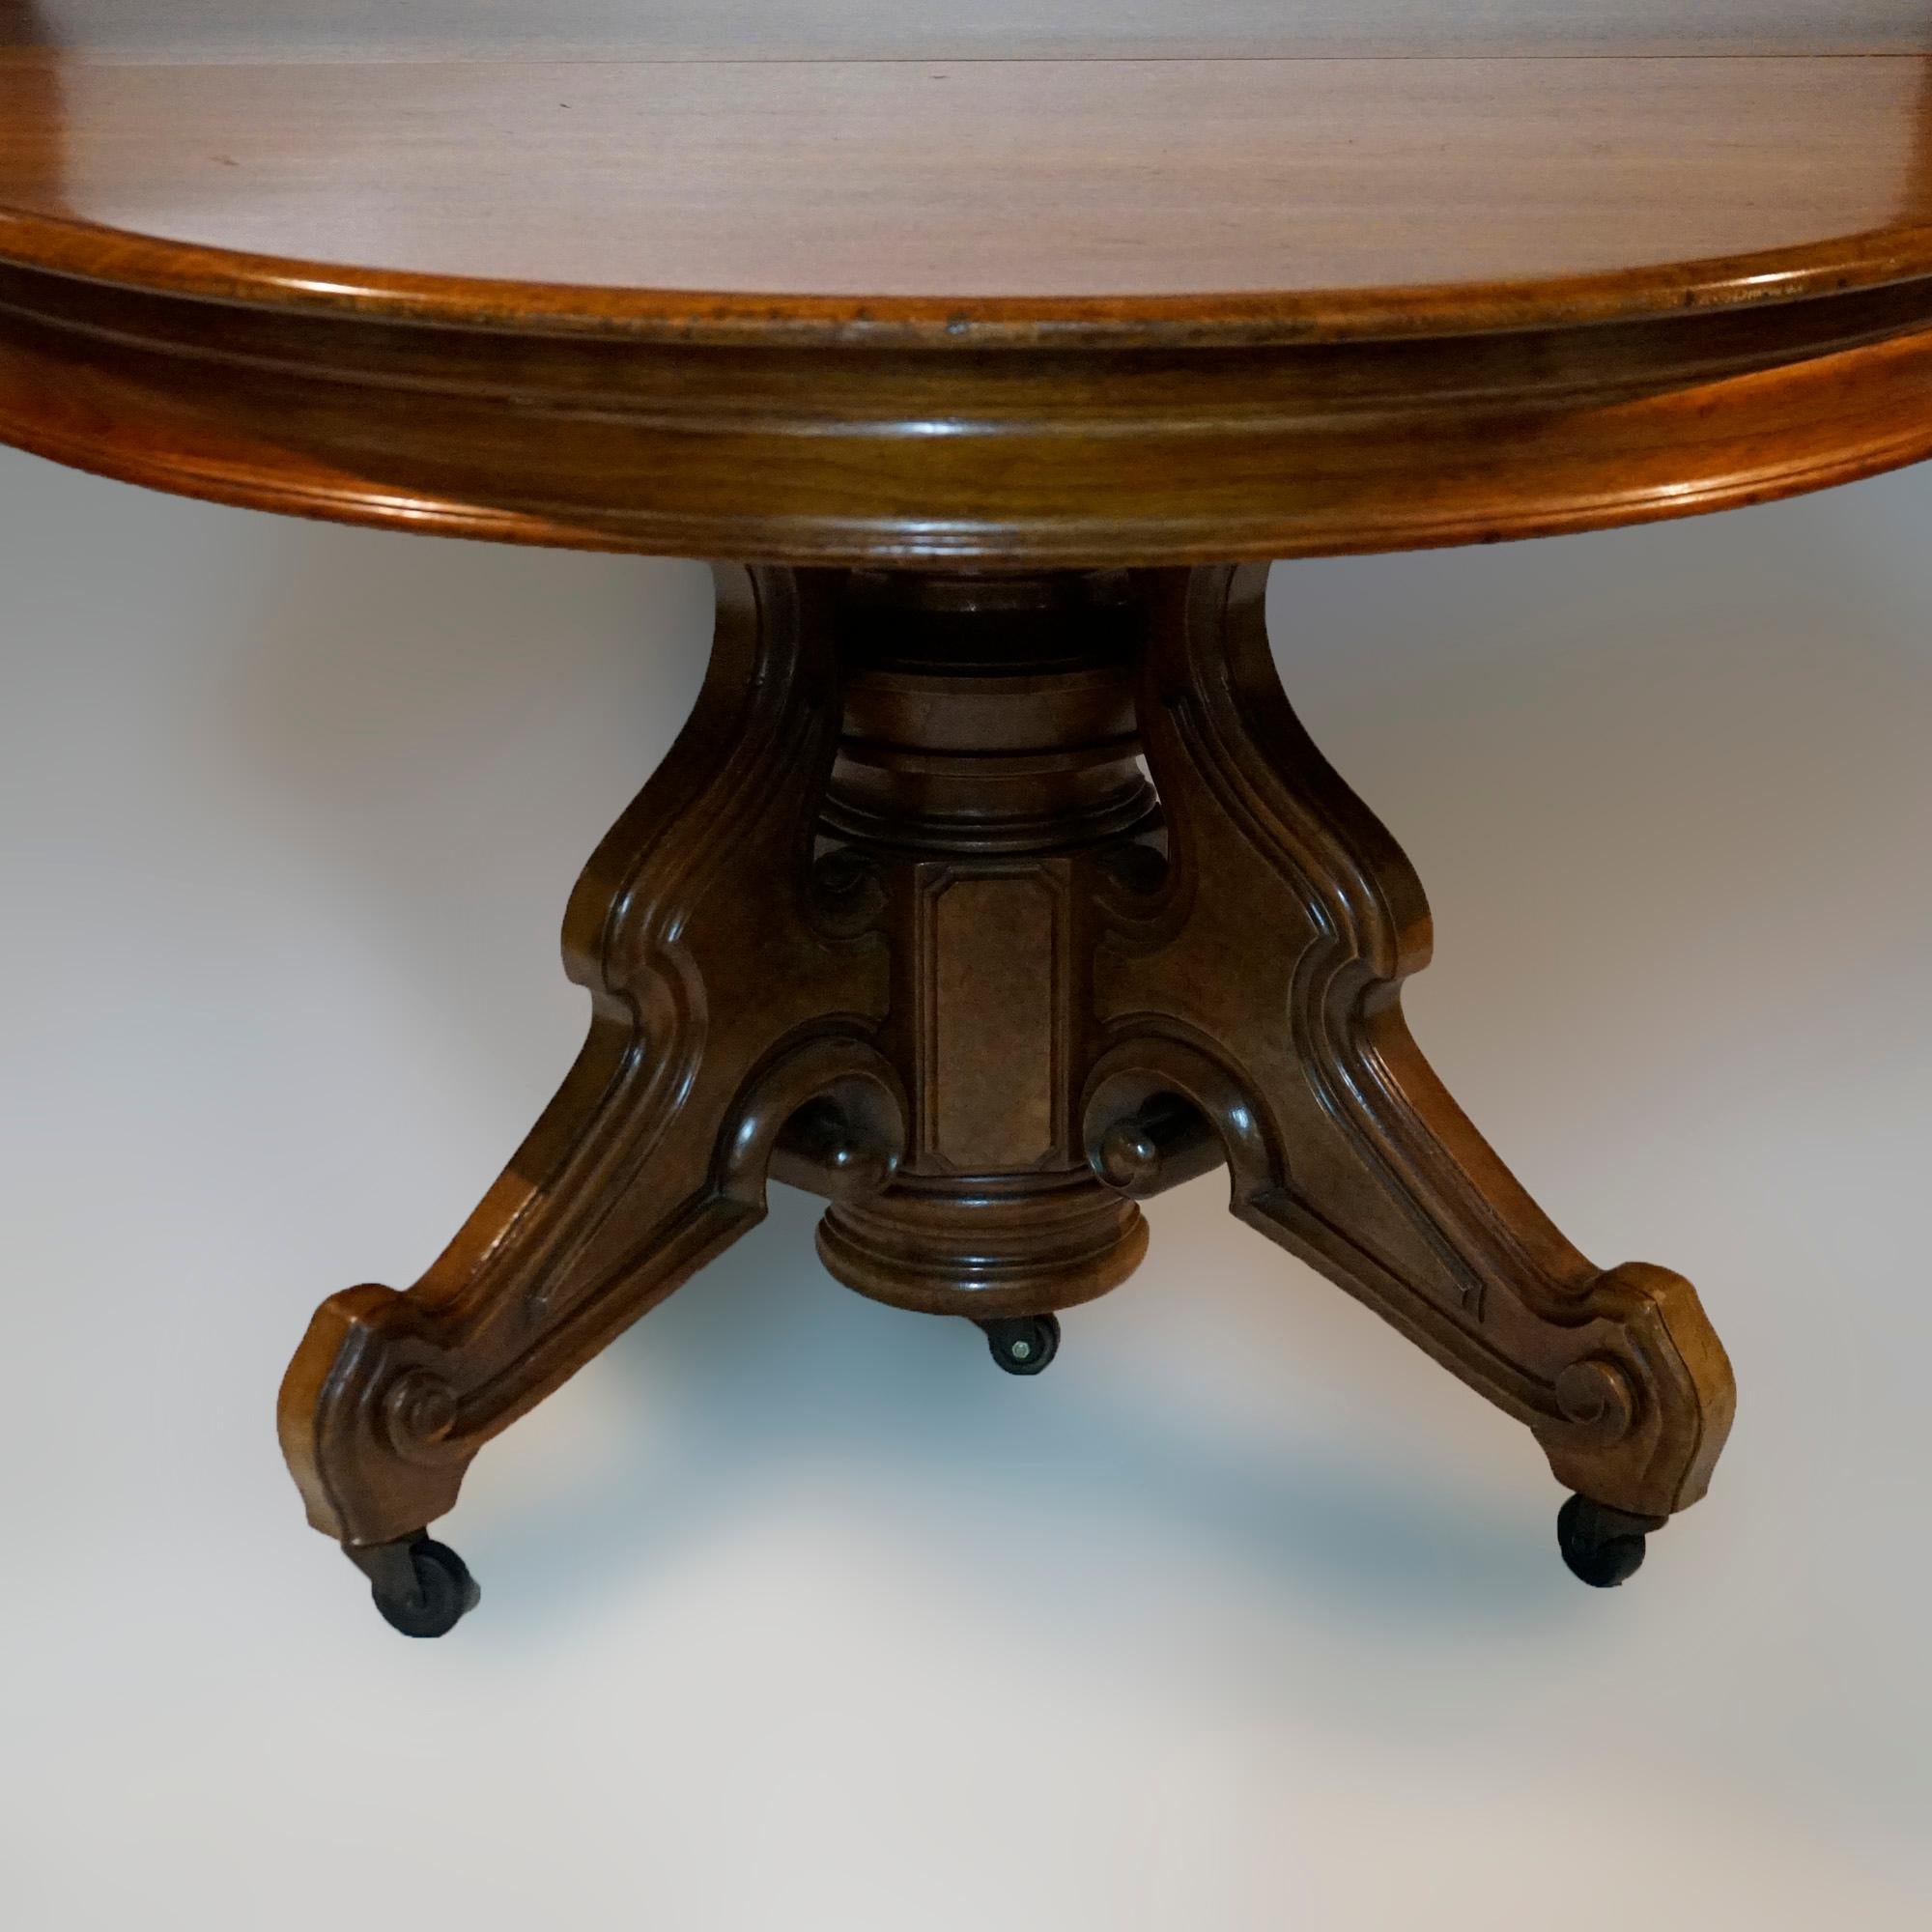 Antique Victorian Round Walnut Extension Dining Table with Six Leaves 19th C 5